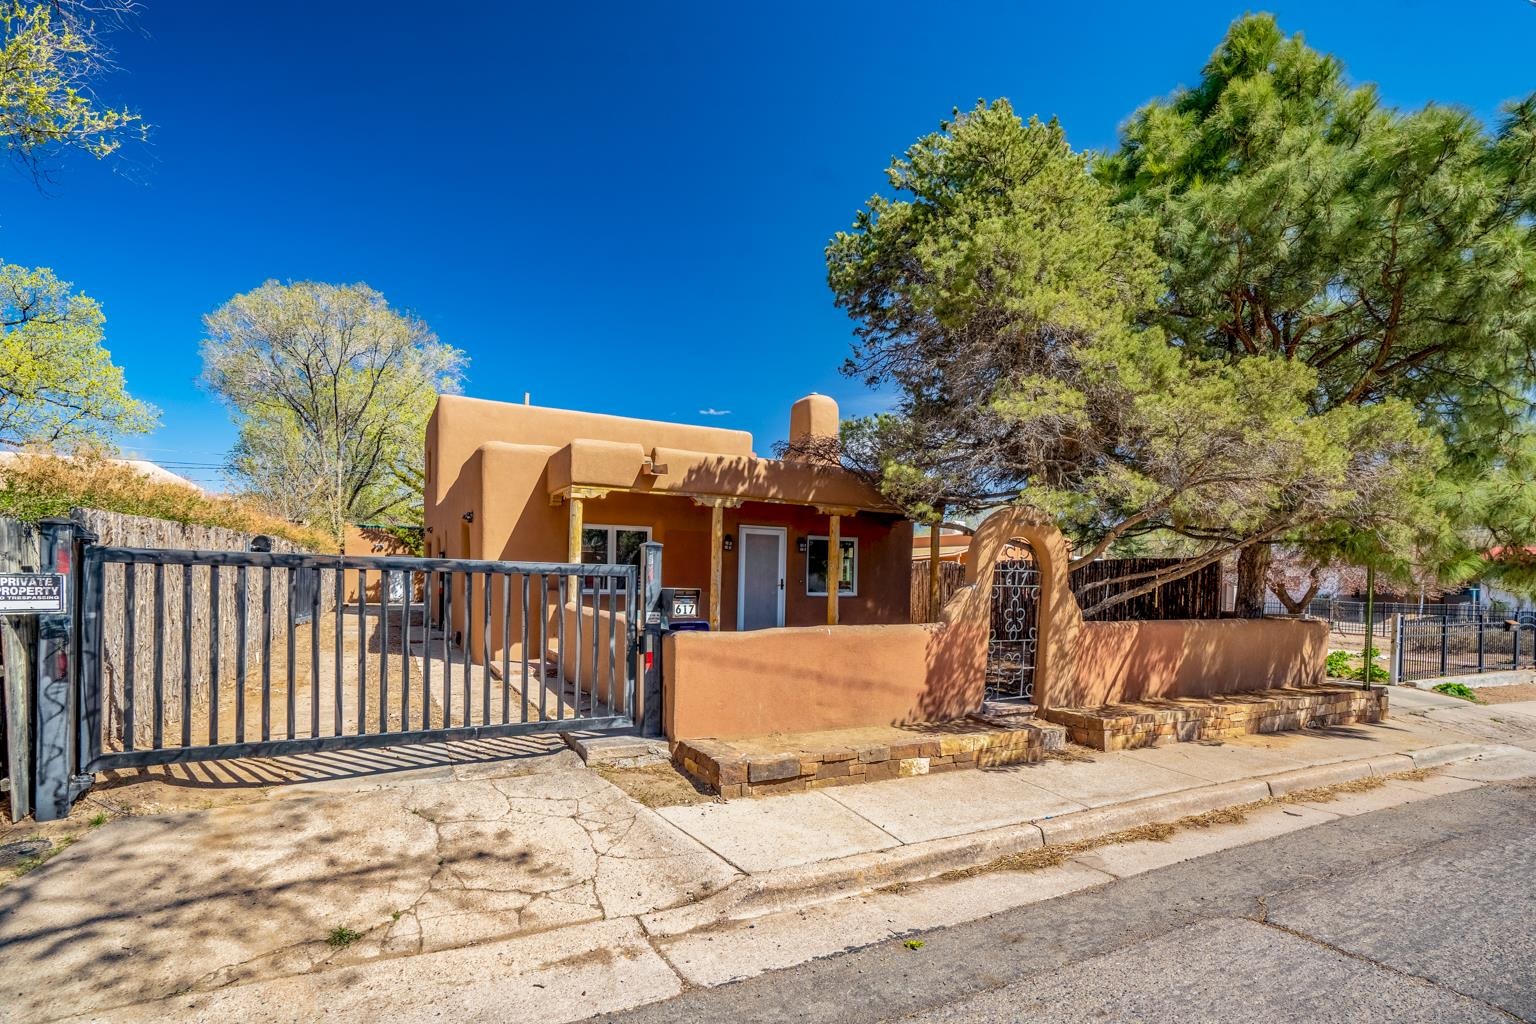 617 Onate, Santa Fe, New Mexico 87505, 2 Bedrooms Bedrooms, ,2 BathroomsBathrooms,Residential,For Sale,617 Onate,202201226